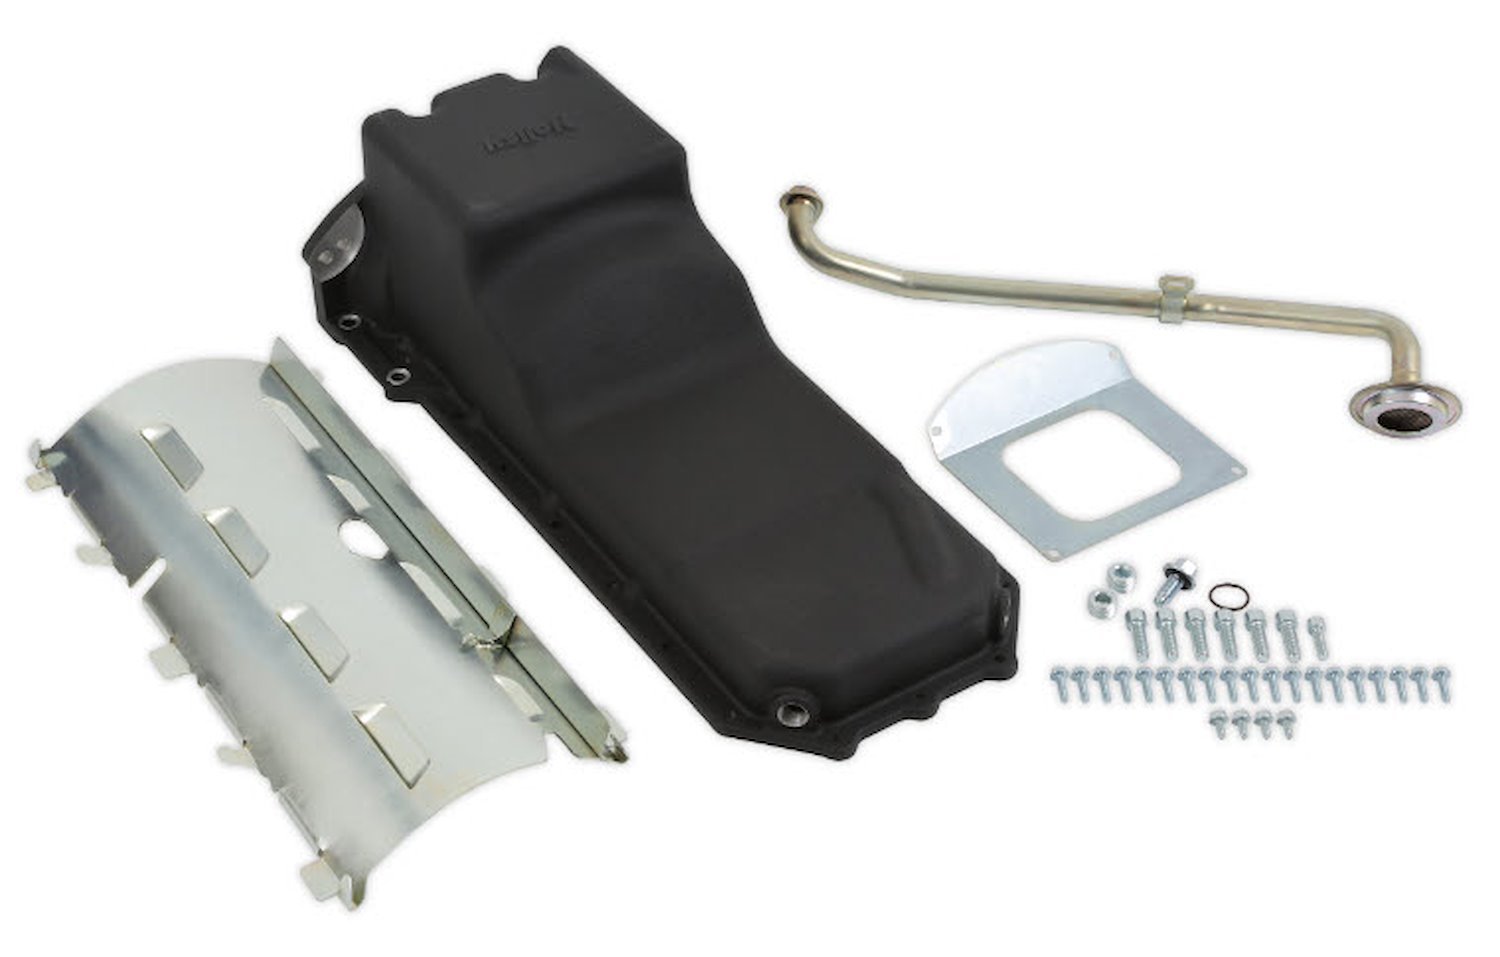 Engine Swap Rear Sump Oil Pan Kit for